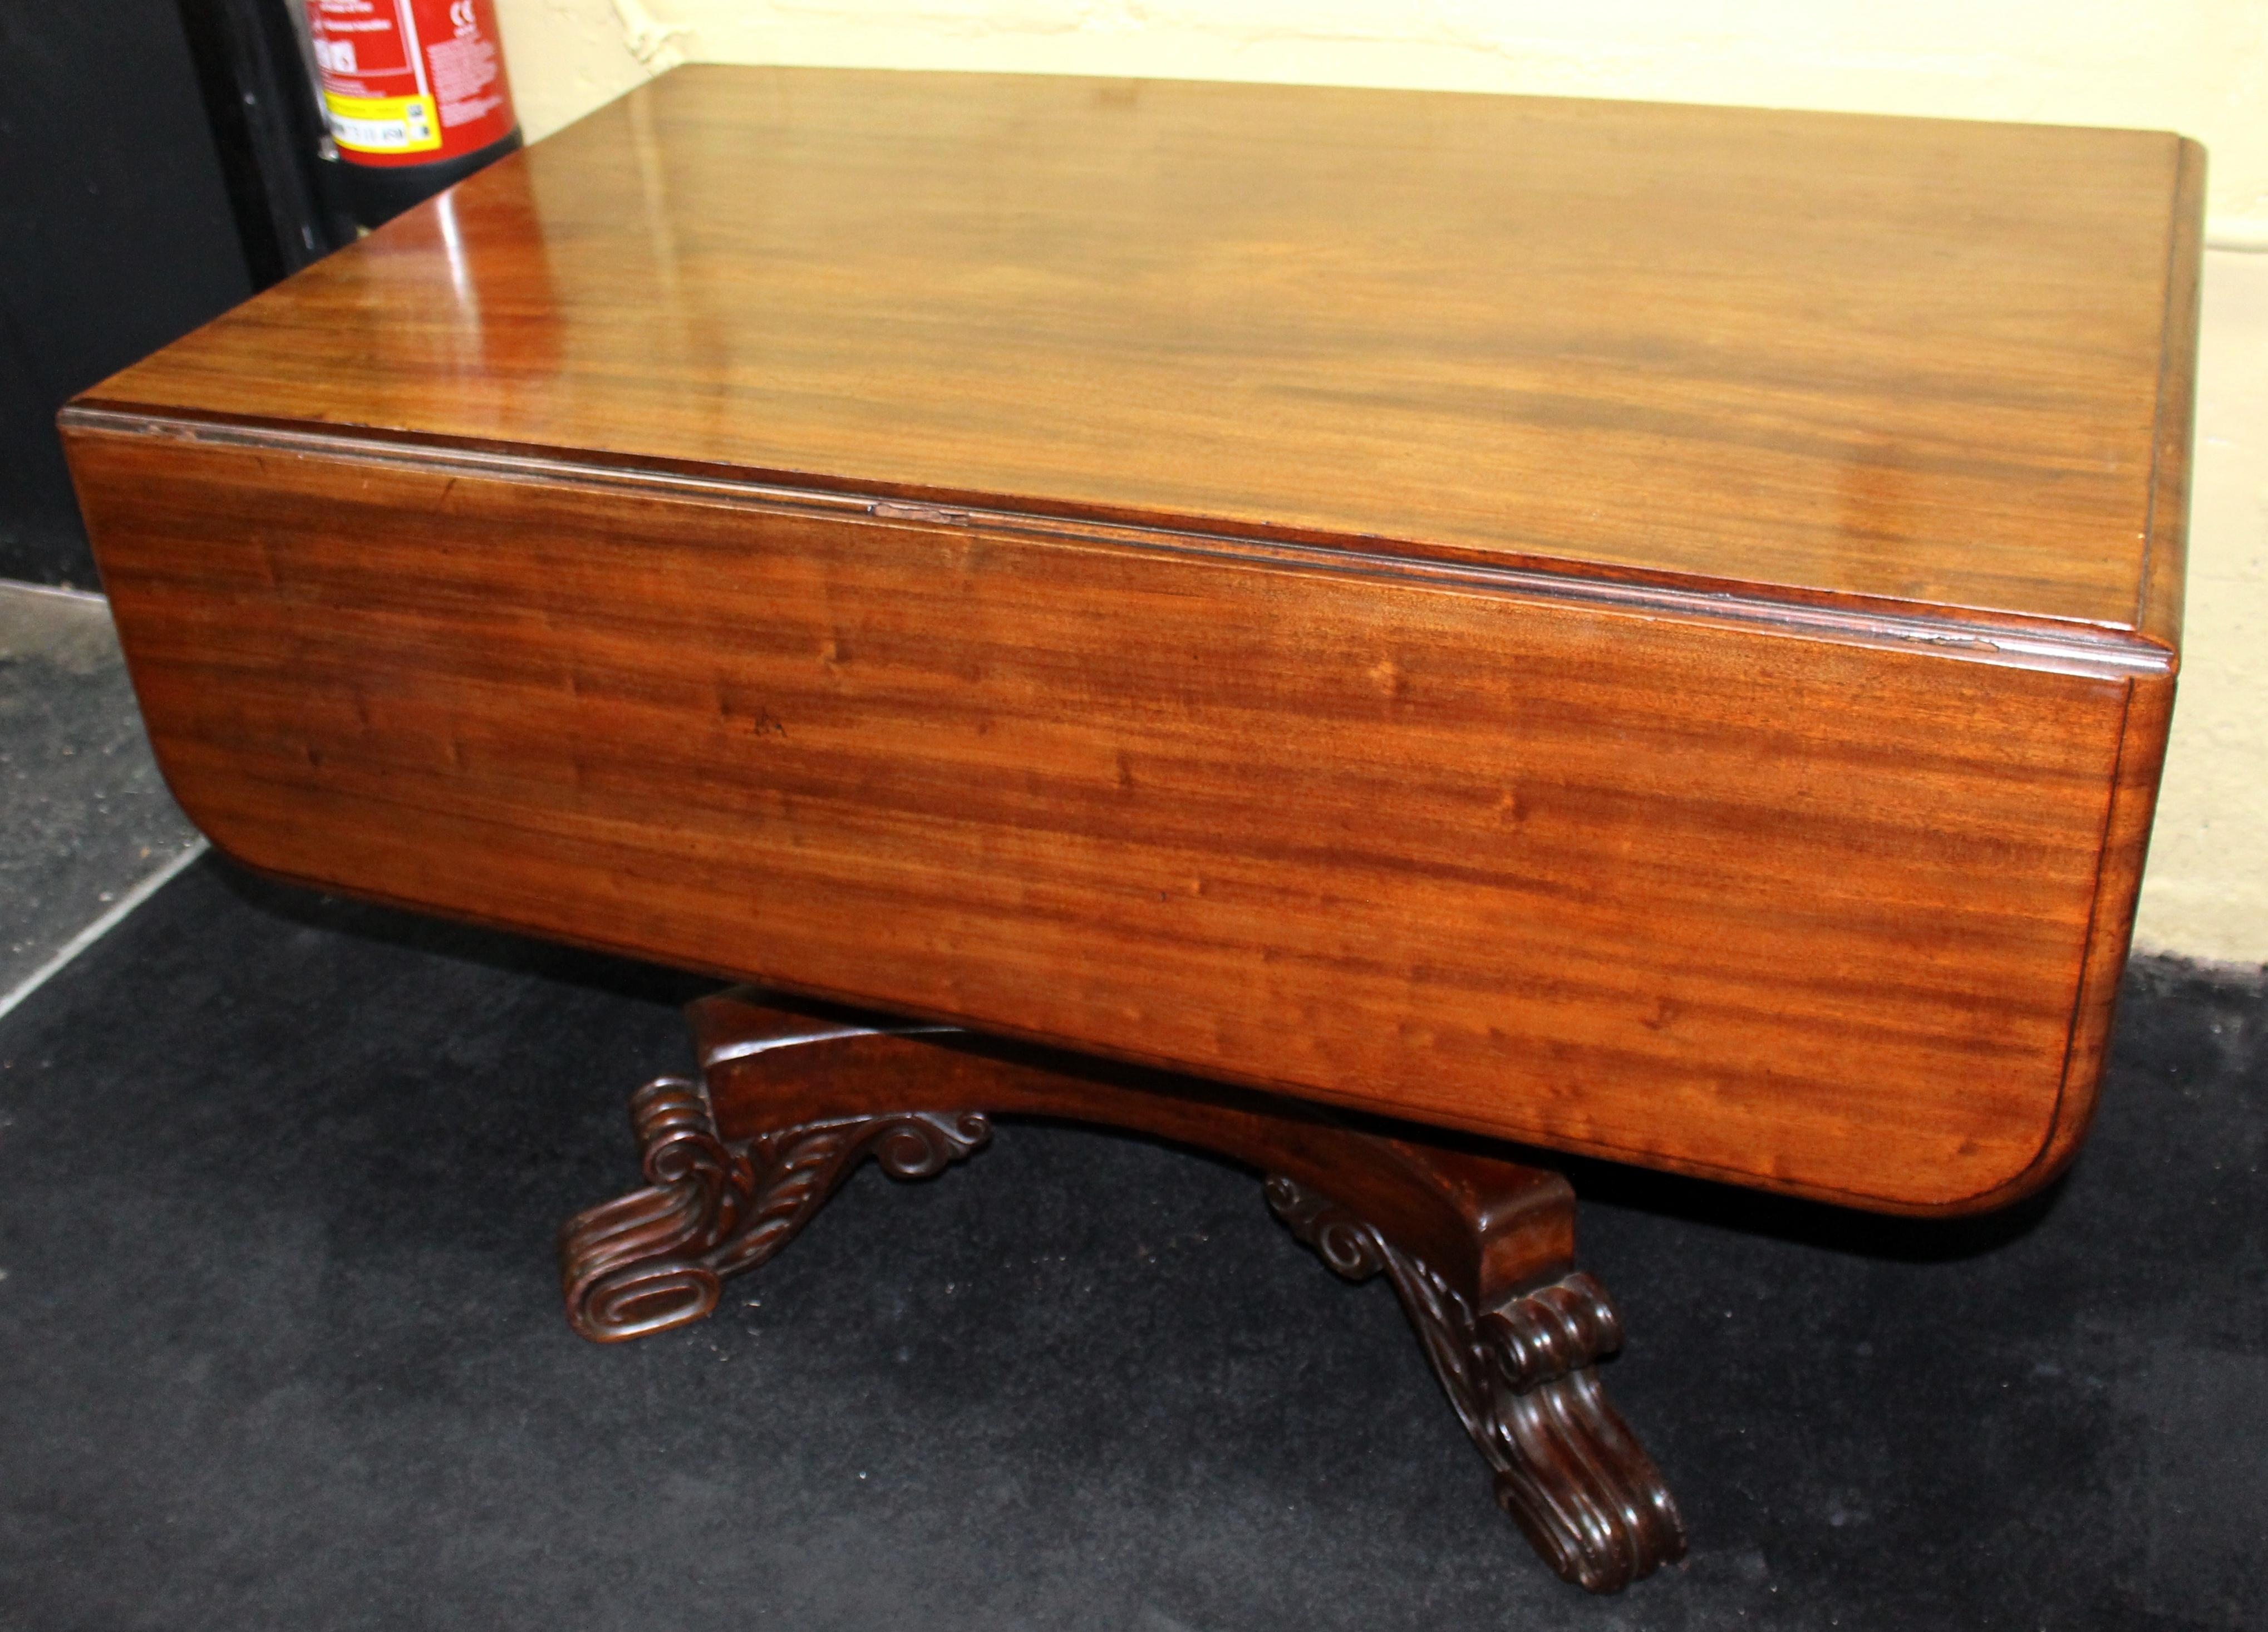 Antique mahogany Duncan Phyfe style centre table

Drop-leaves to either side, drawer to one end.

Heavily carved pedestal base and feet

Lovely patina and color to the timber, offered in very good condition

Many uses; centre table, library